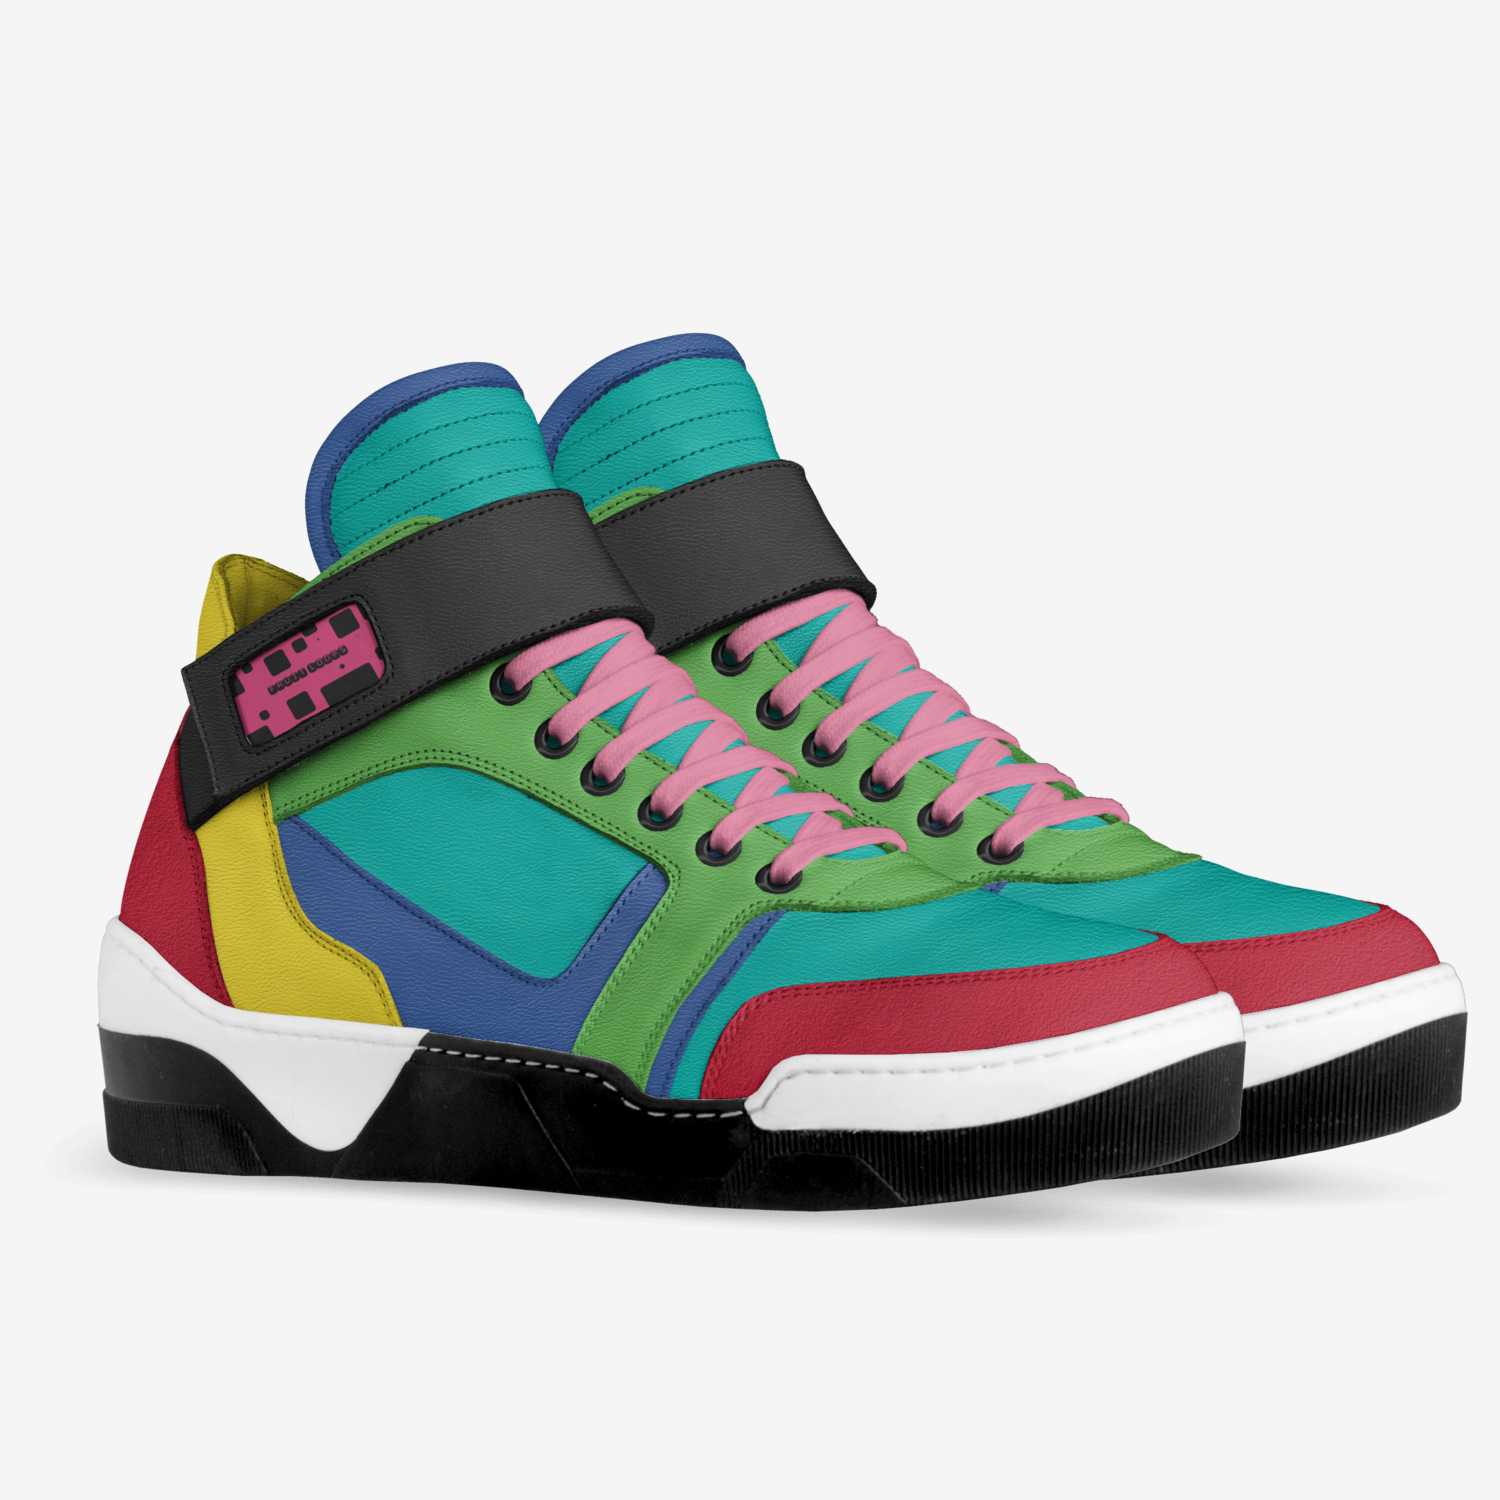 loops | A Custom Shoe concept by Vindy Irving